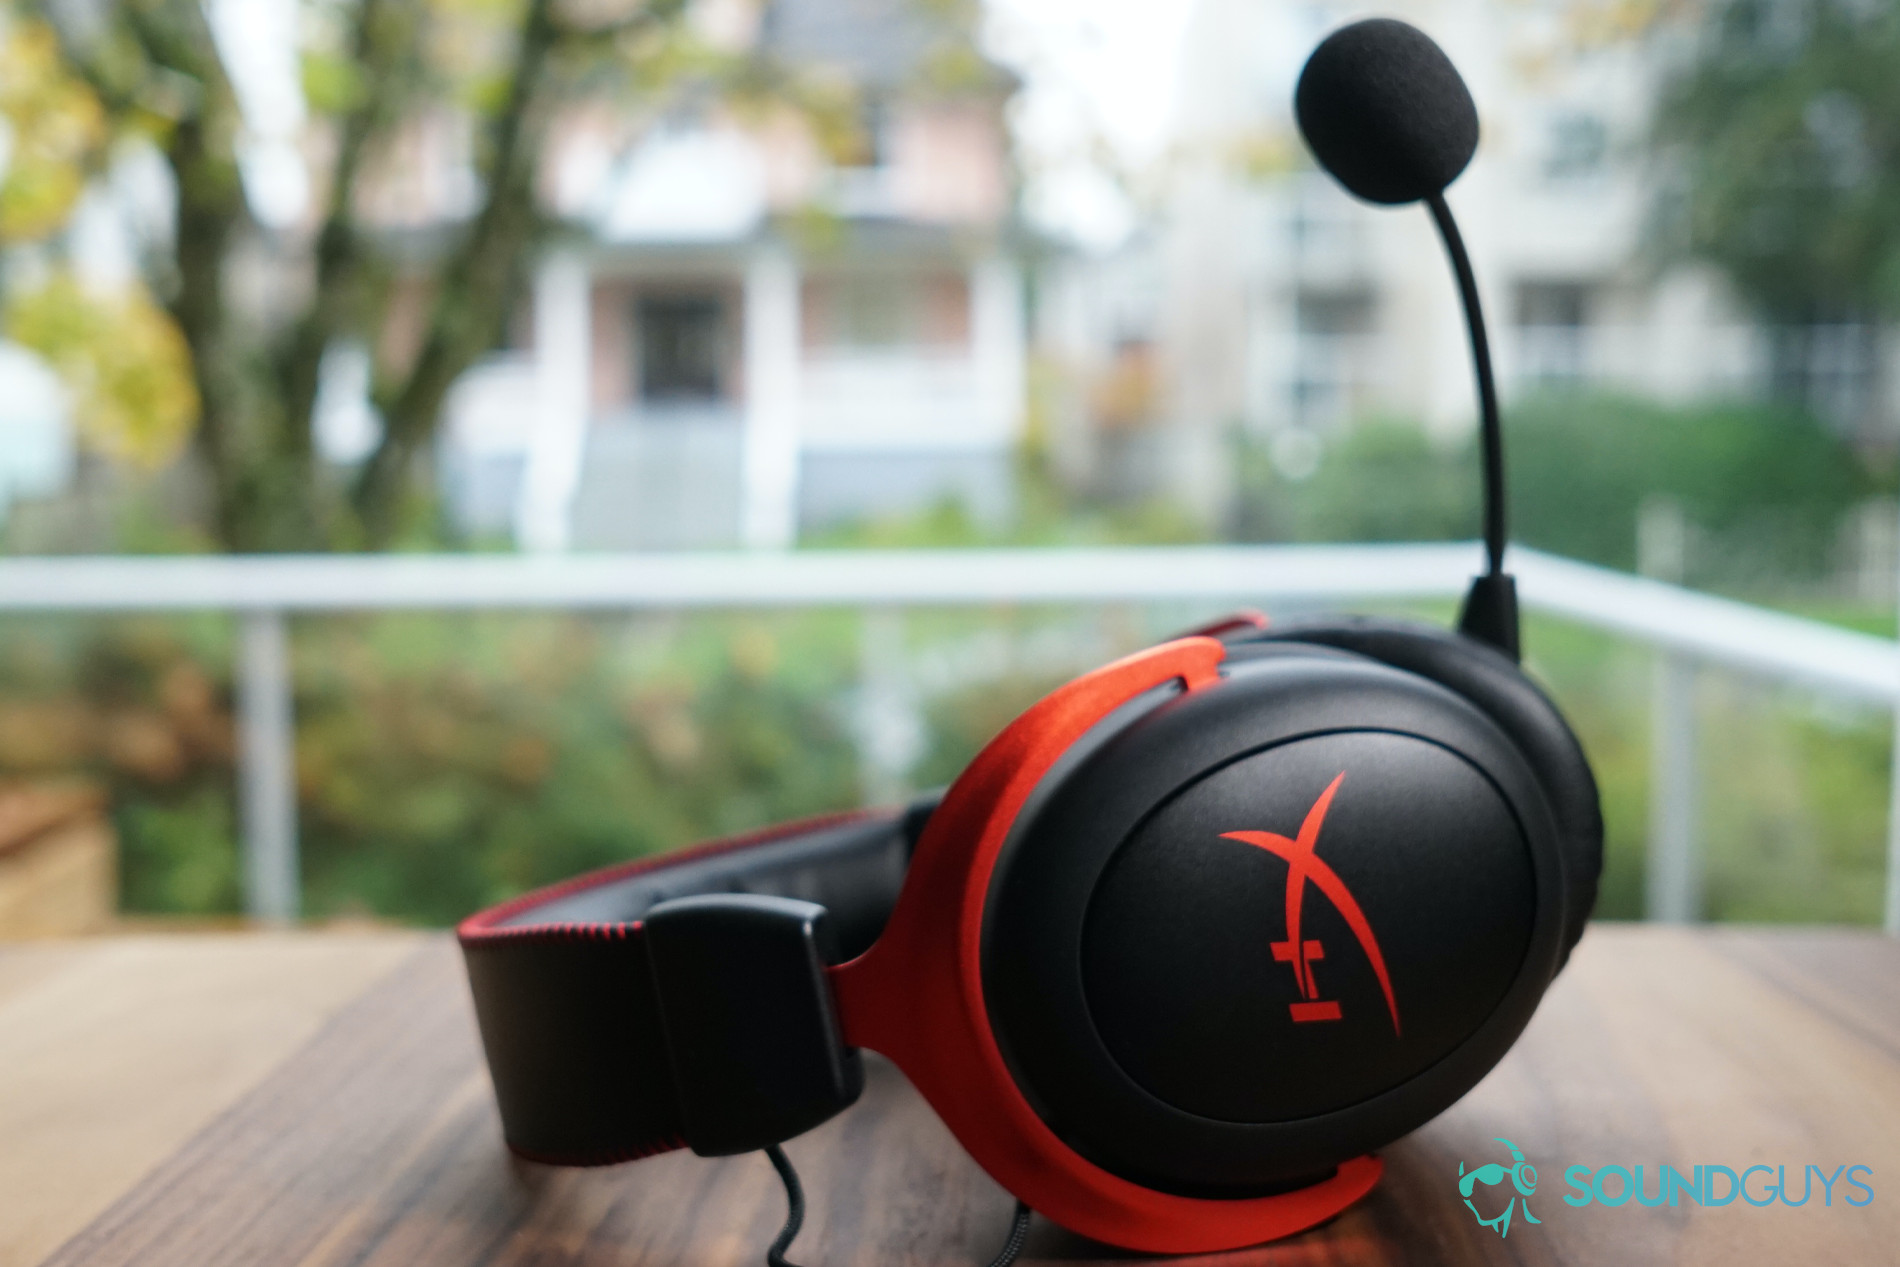 The HyperX Cloud II Wireless lays on a wooden table.